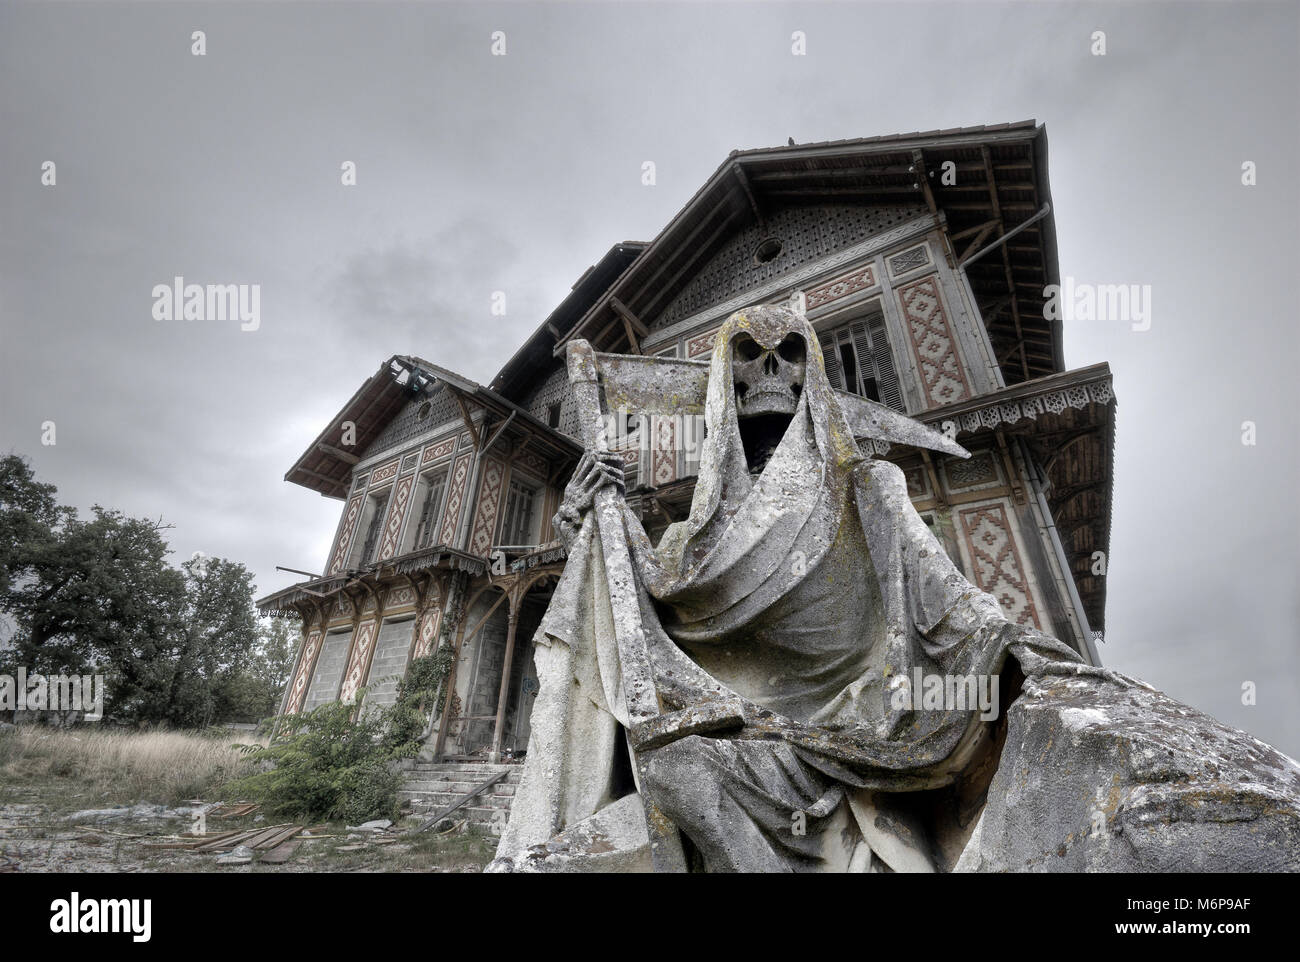 haunted house with a gream reaper statue in foreground Stock Photo